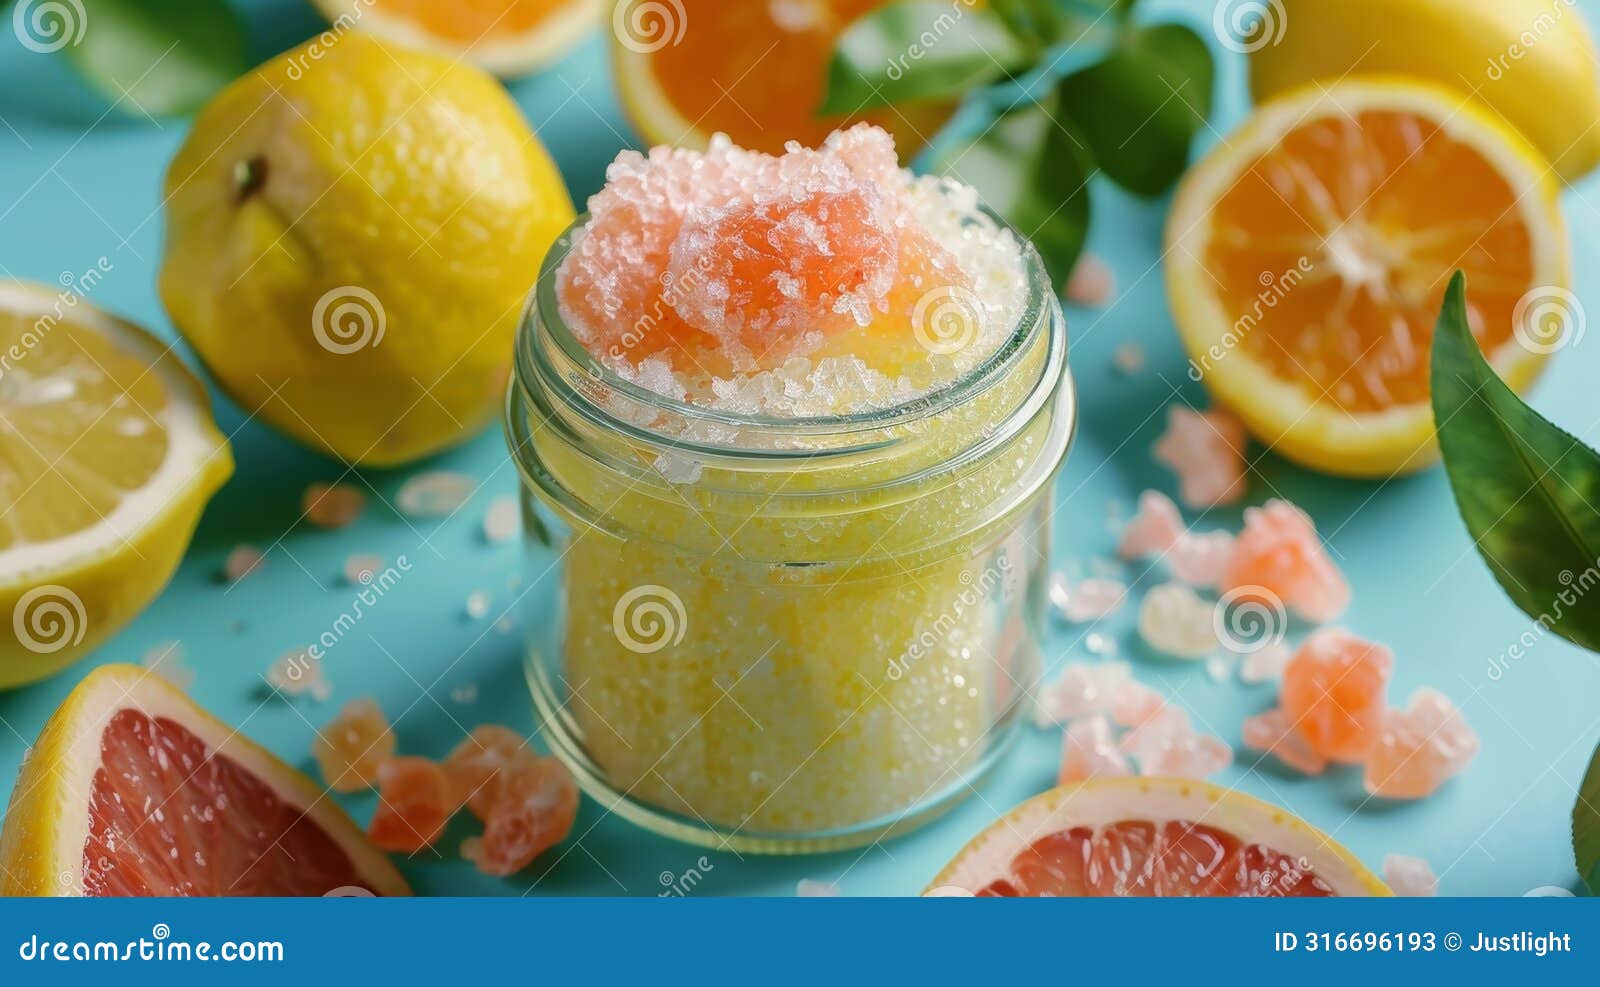 a jar of rich creamy body scrub made with natural sea salt and invigorating citrus scents